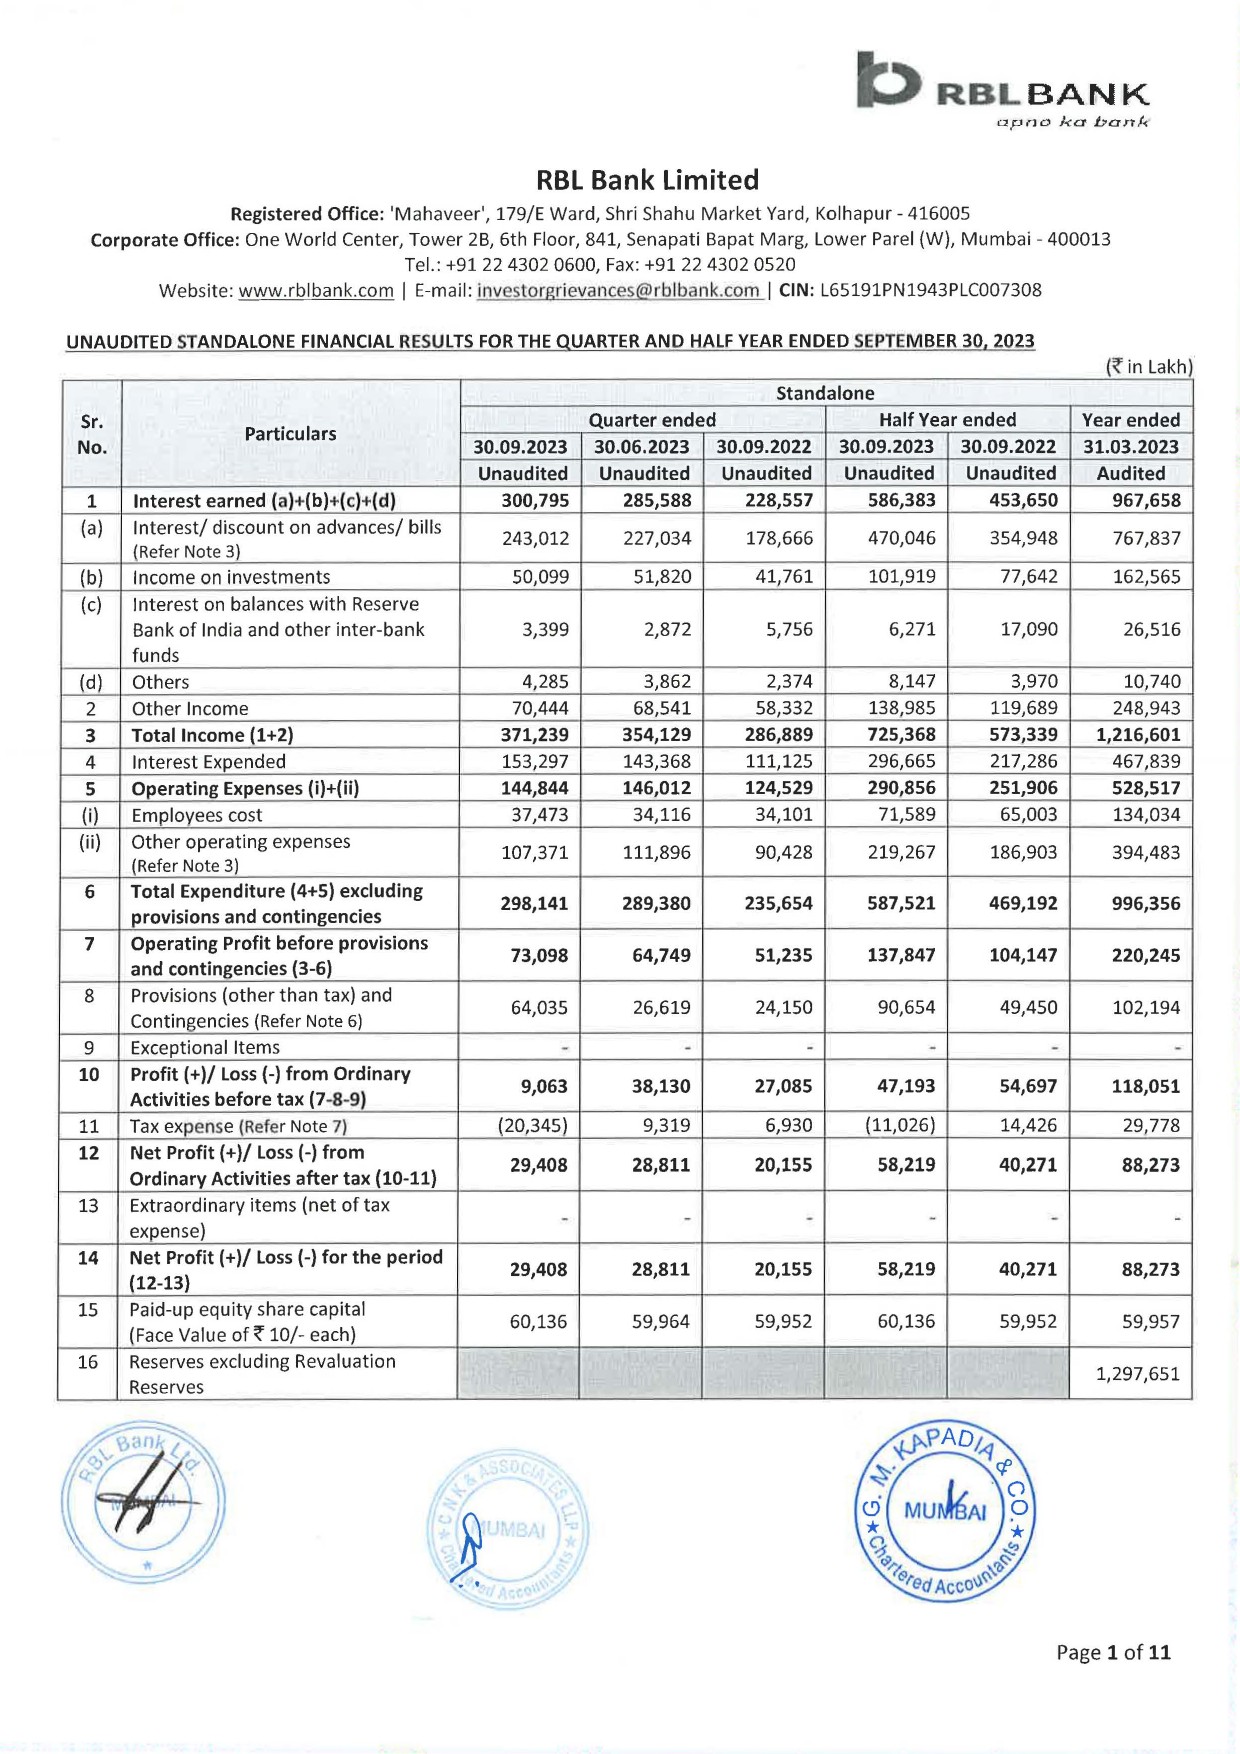 RBL Bank Ltd Second Quarter of Financial Year 2023-2024 Results 1